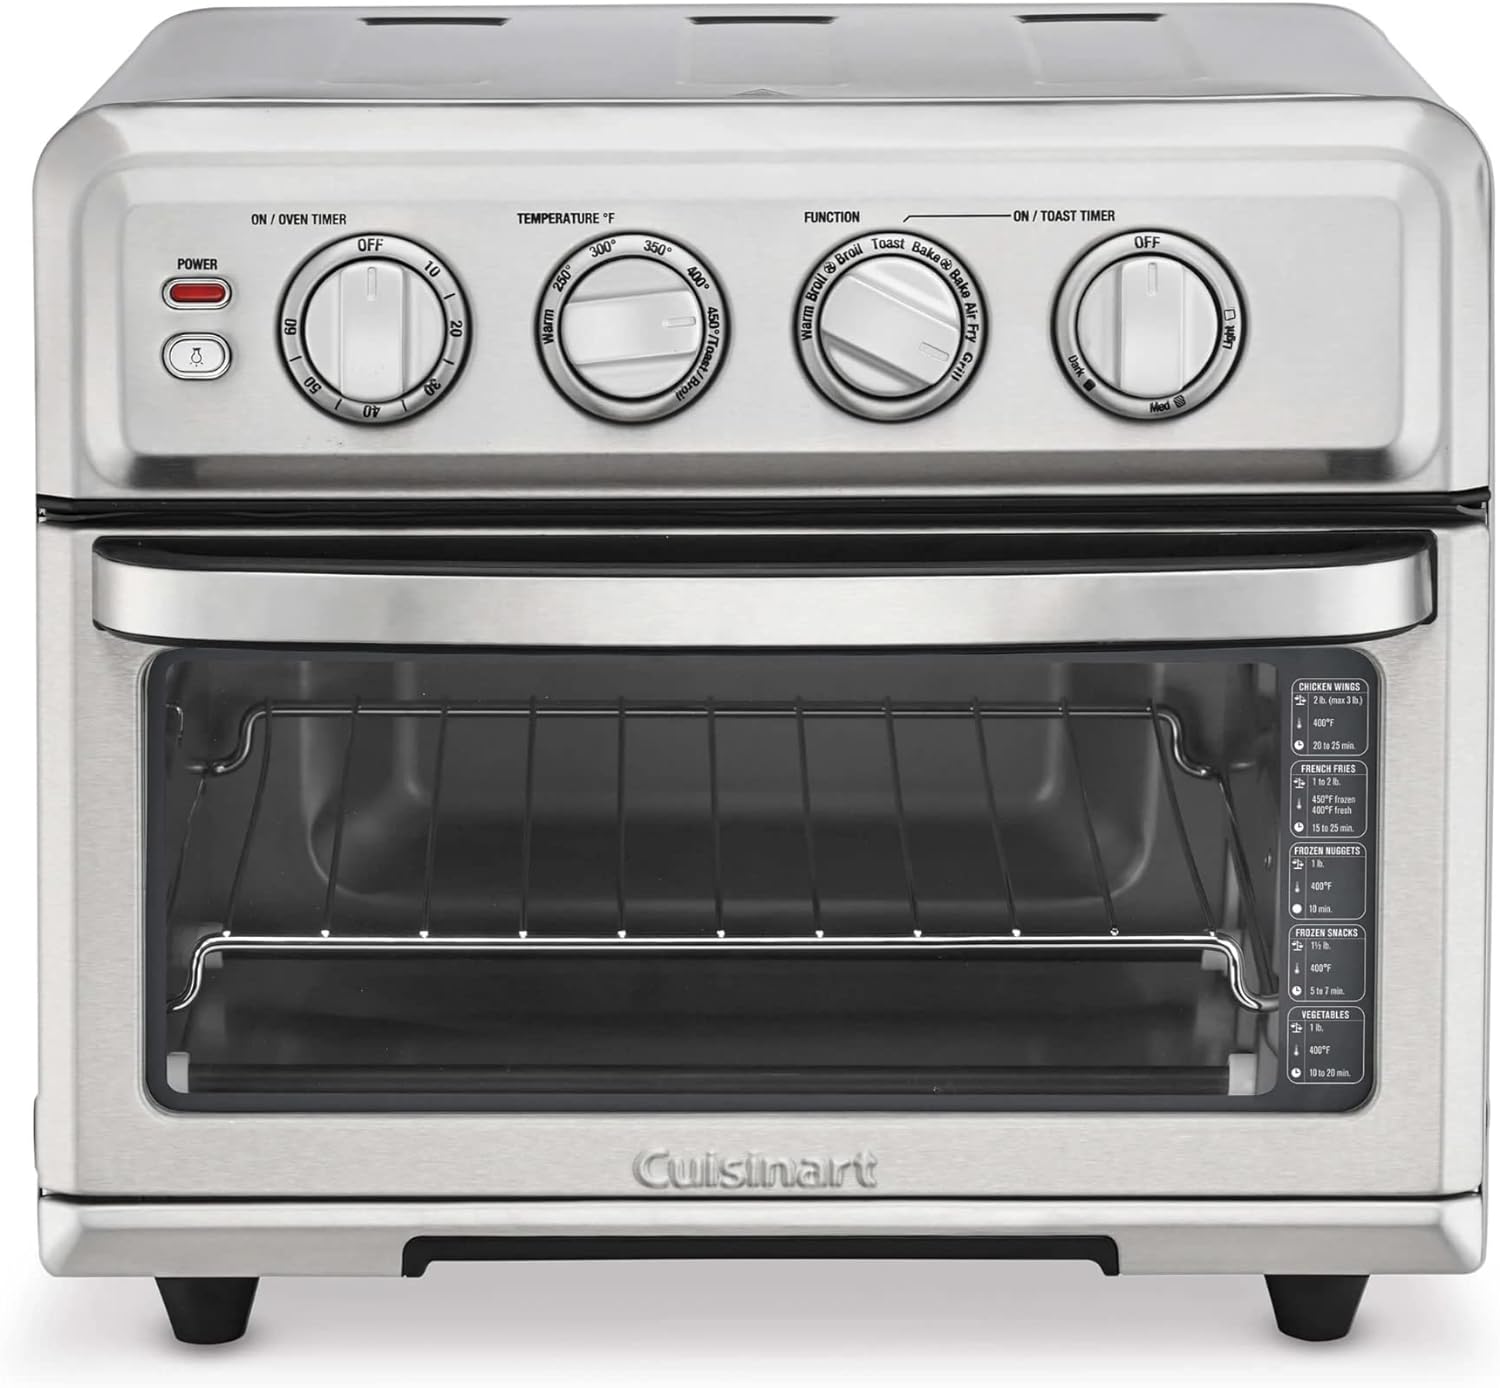 Cuisinart Air Fryer + Convection Toaster Oven, 8-1 Oven with Bake, Grill, Broil  Warm Options, Stainless Steel, TOA-70